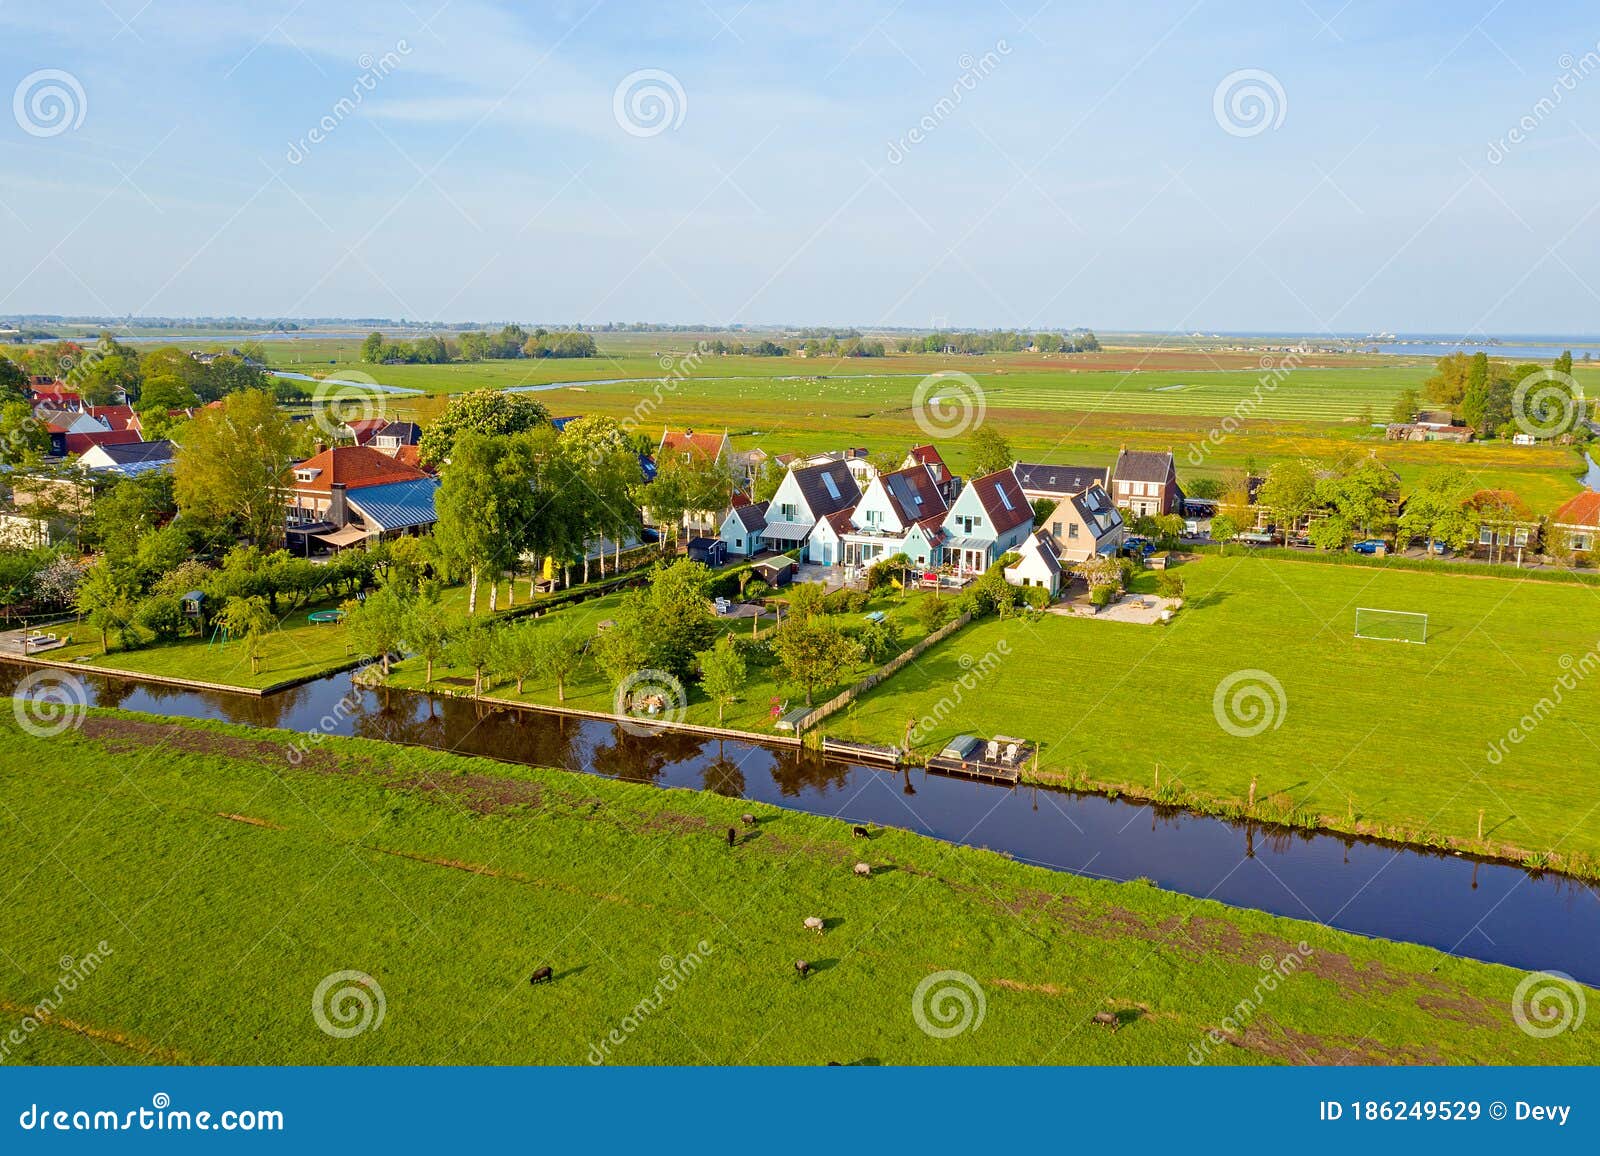 Aerial from a Typical Dutch Landscape in the Netherlands Stock Image ...